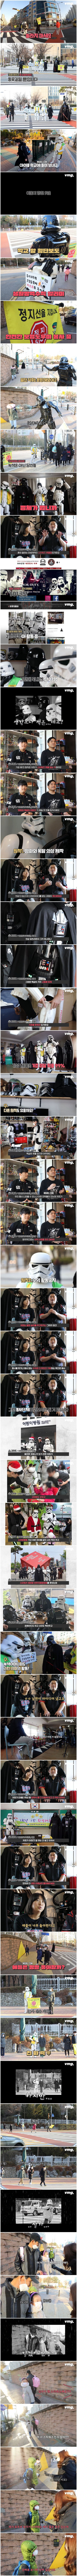 The Interview of Darth Vader on the Way to School in Incheon